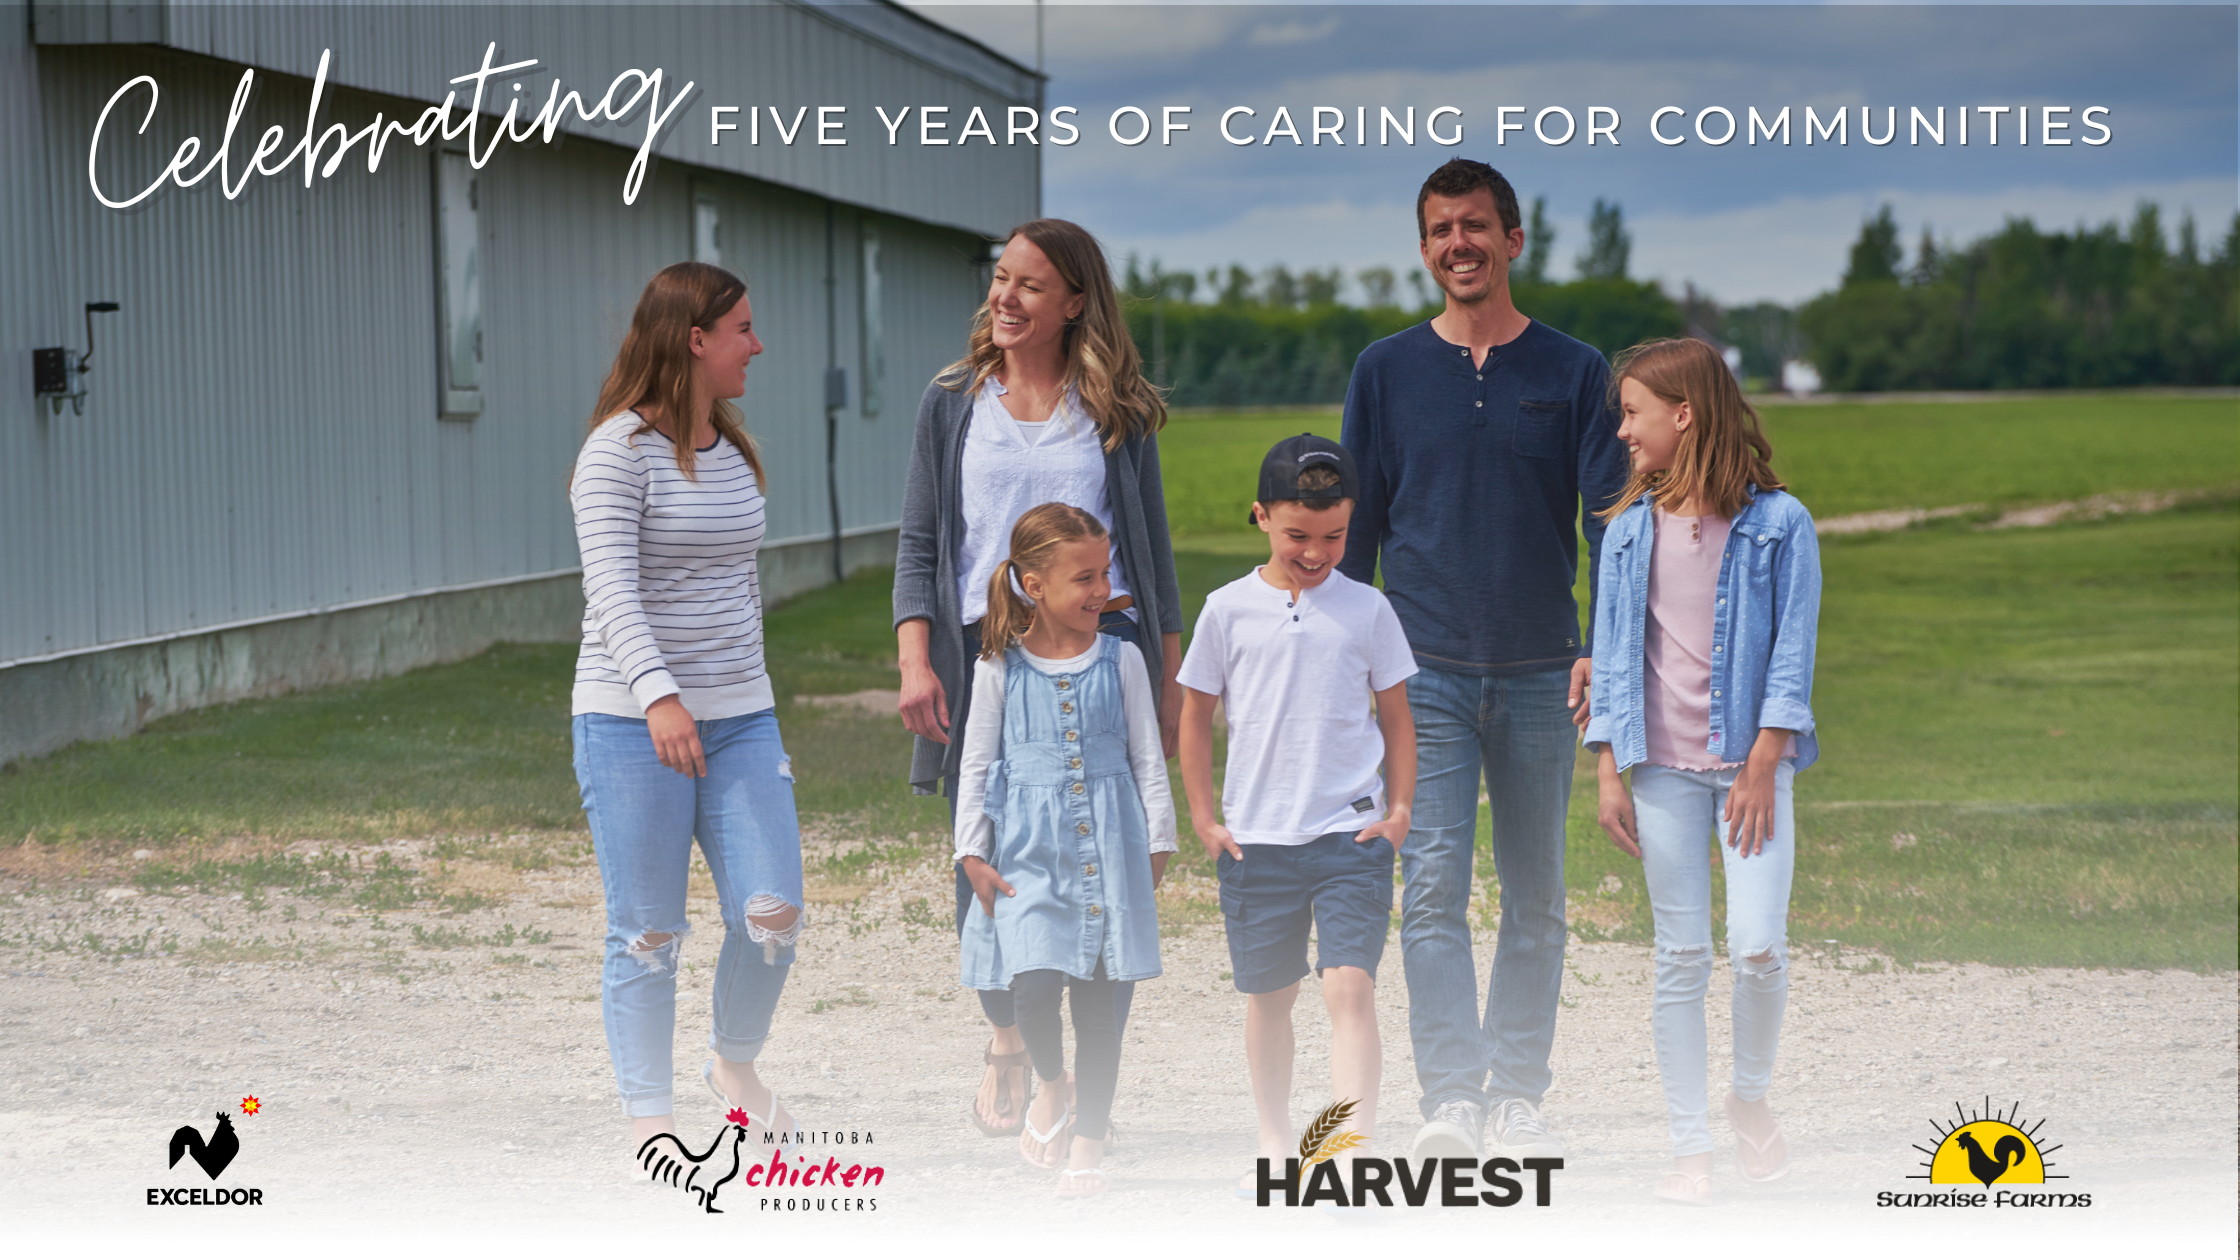 Manitoba Chicken Producers, Exceldor Cooperative, and Sunrise Farms Celebrate Five Years of Partnership with Harvest Manitoba to Support Families in Need